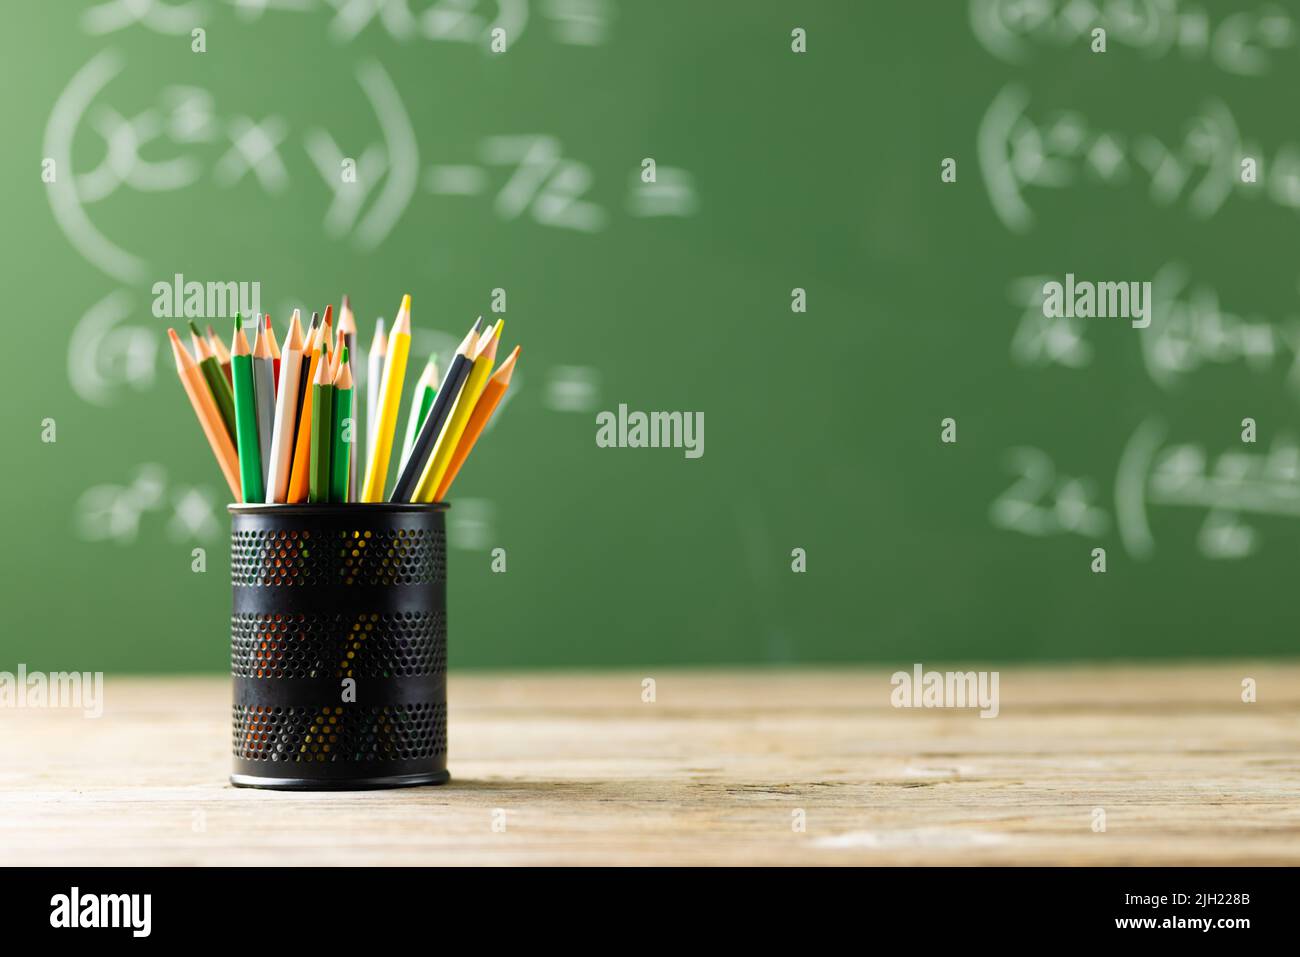 Image of cup with crayons over mathematical formulas on black board Stock Photo